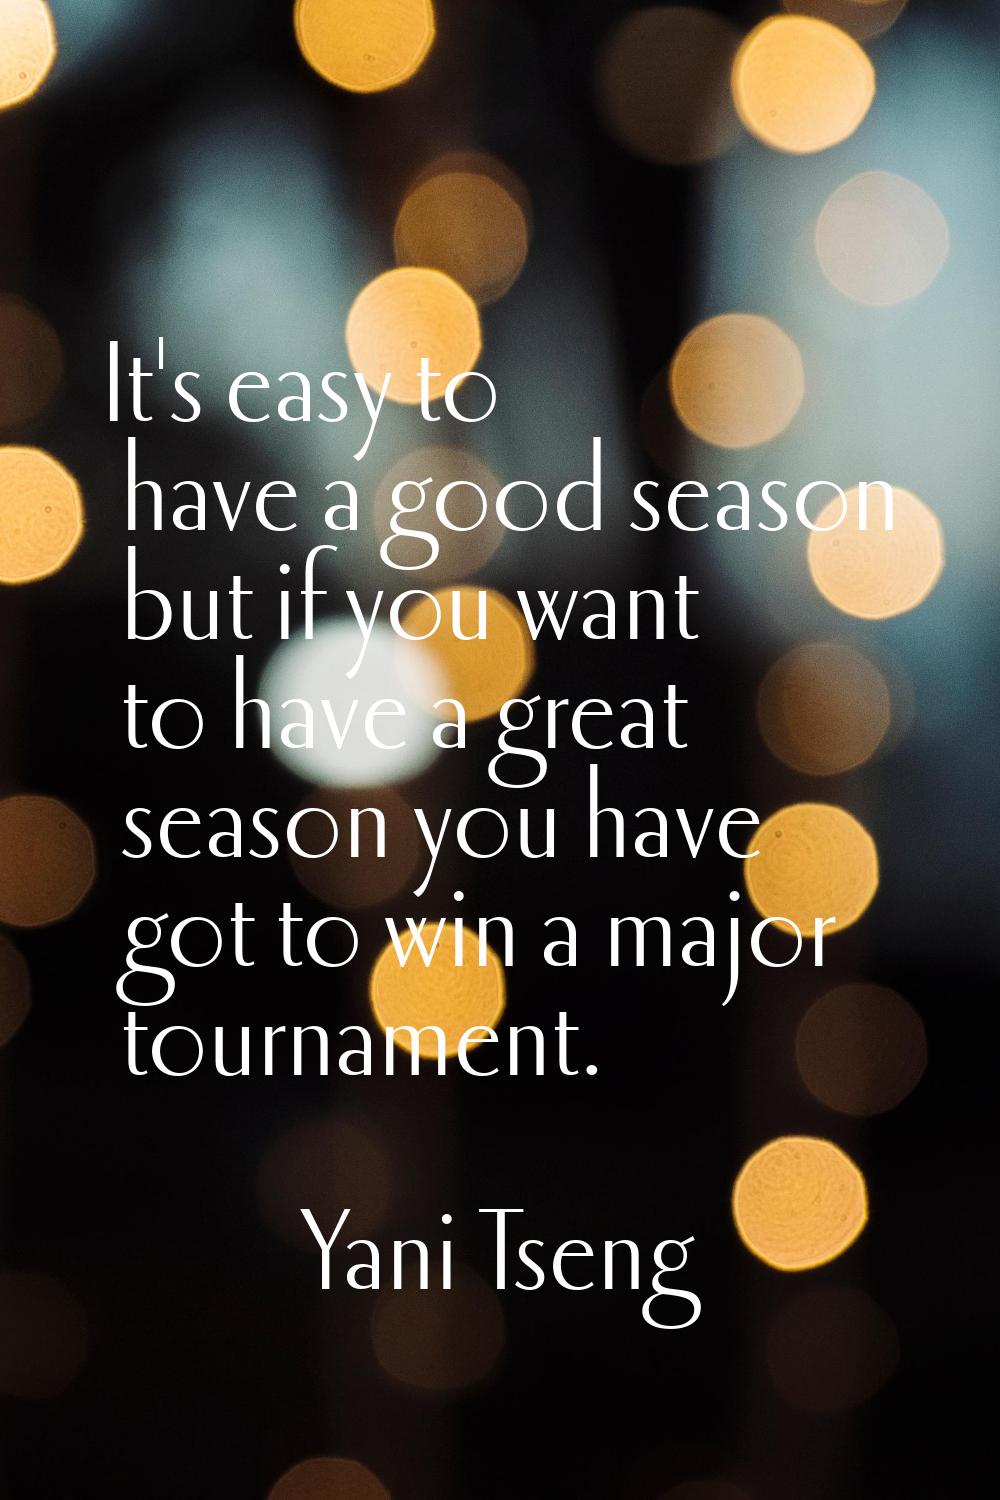 It's easy to have a good season but if you want to have a great season you have got to win a major 